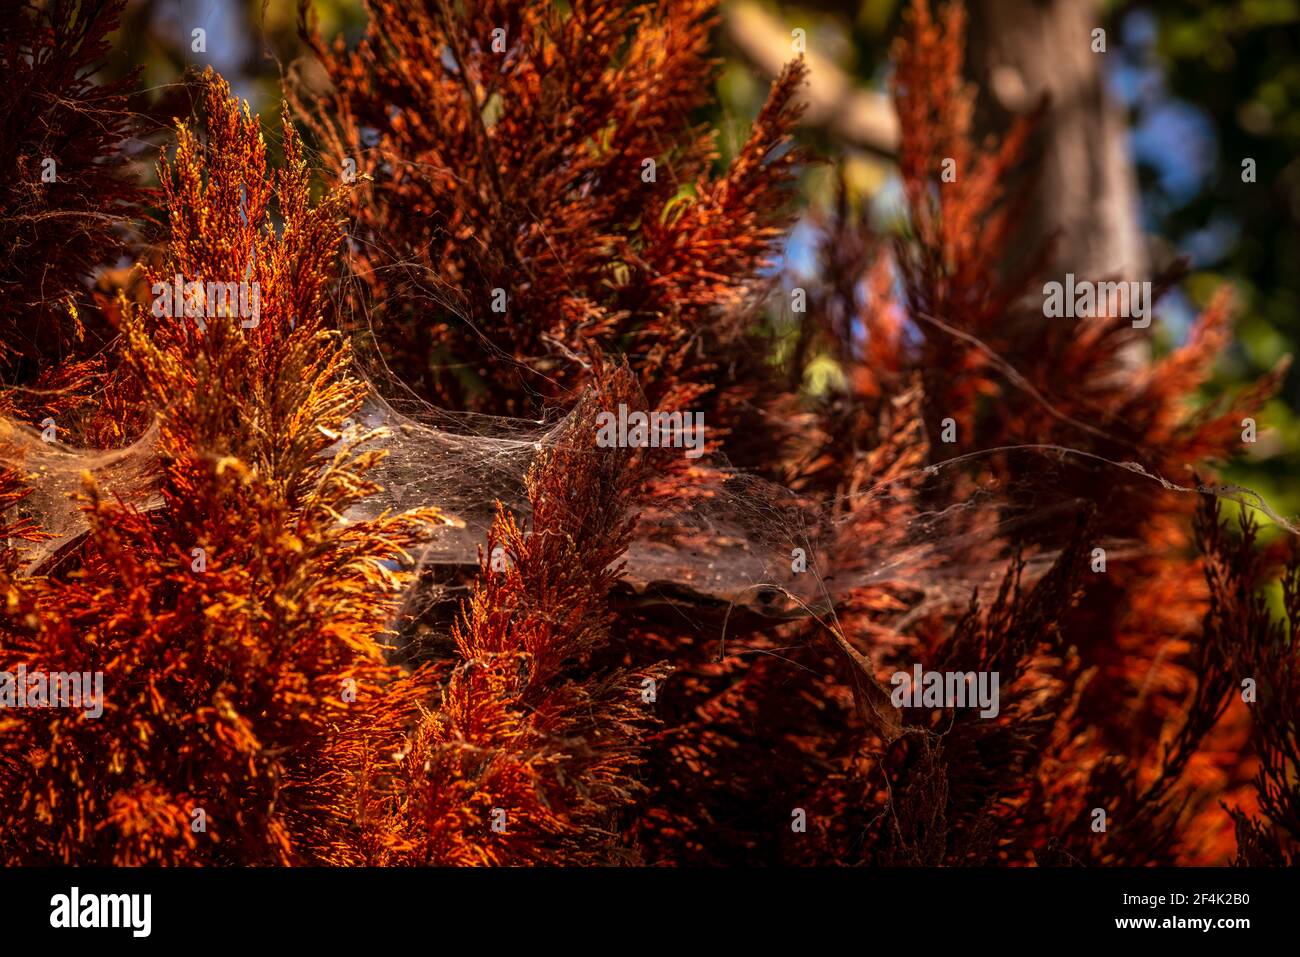 SILK WEB IN GLOWING AMBER LIGHT - Summer colours of Lesvos. Deep orange morning sunlight on a bed of coniferous leaves creative dark background. Photo Stock Photo